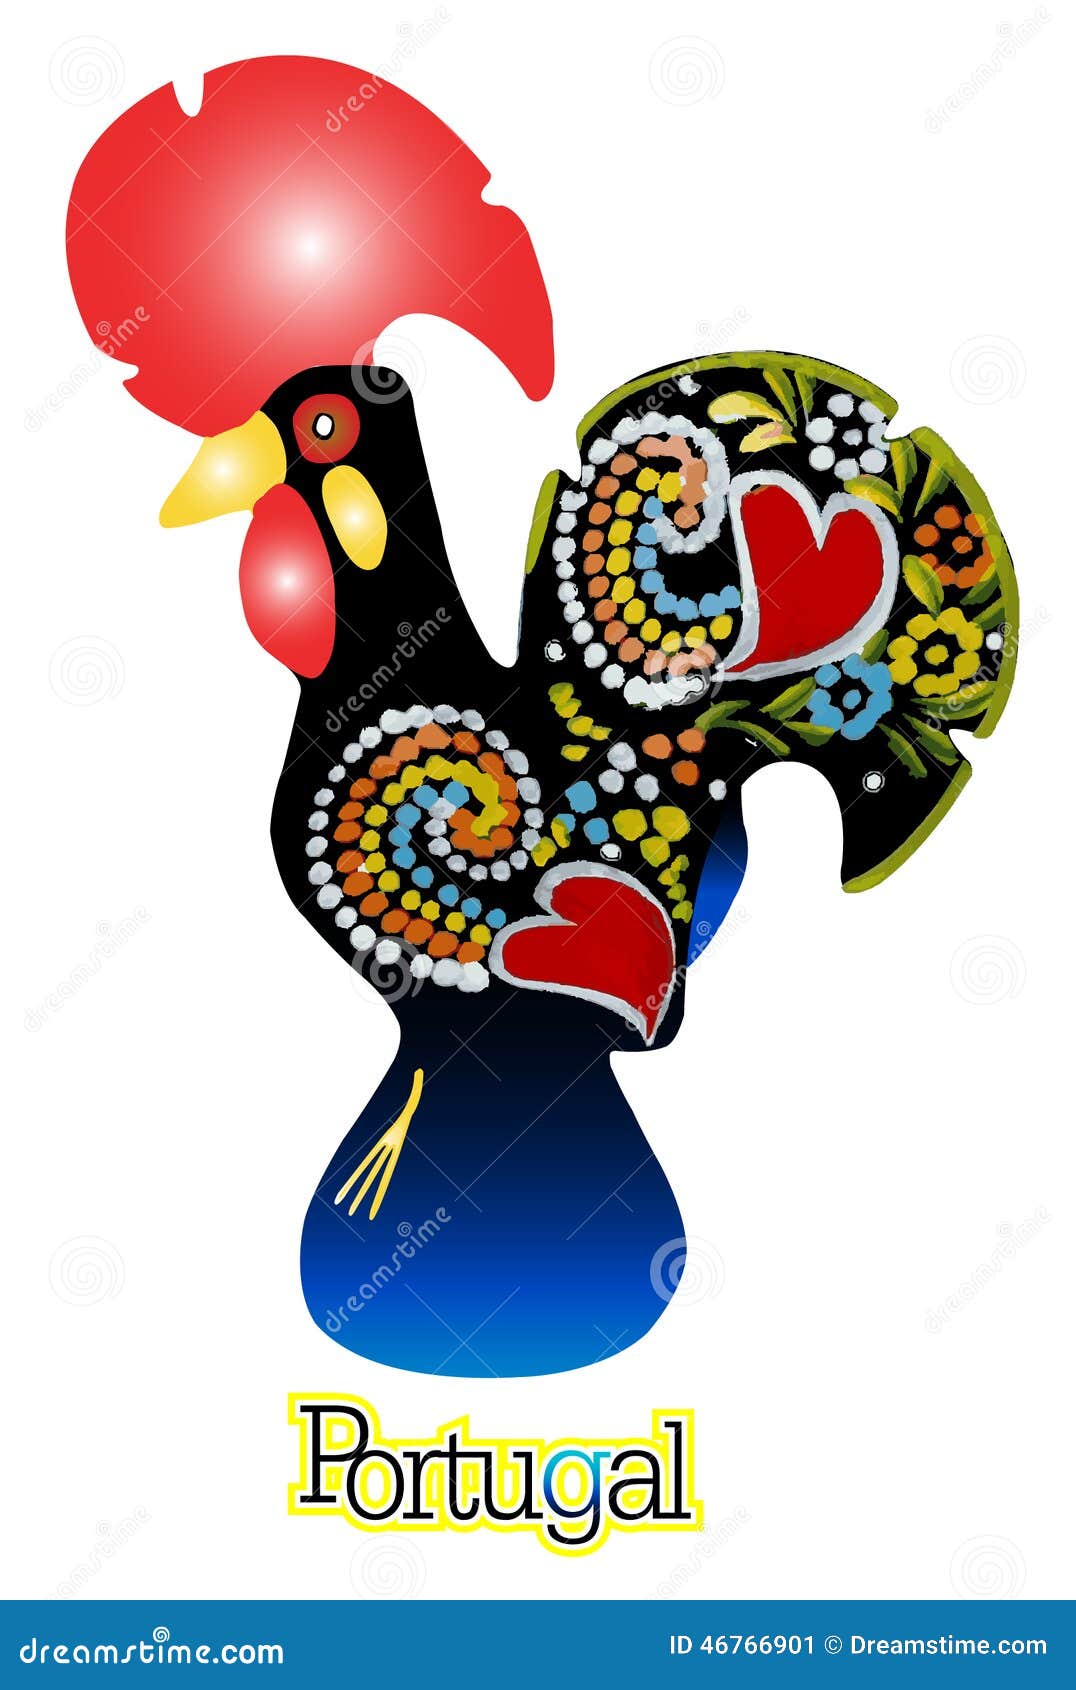 portuguese rooster clipart - photo #9